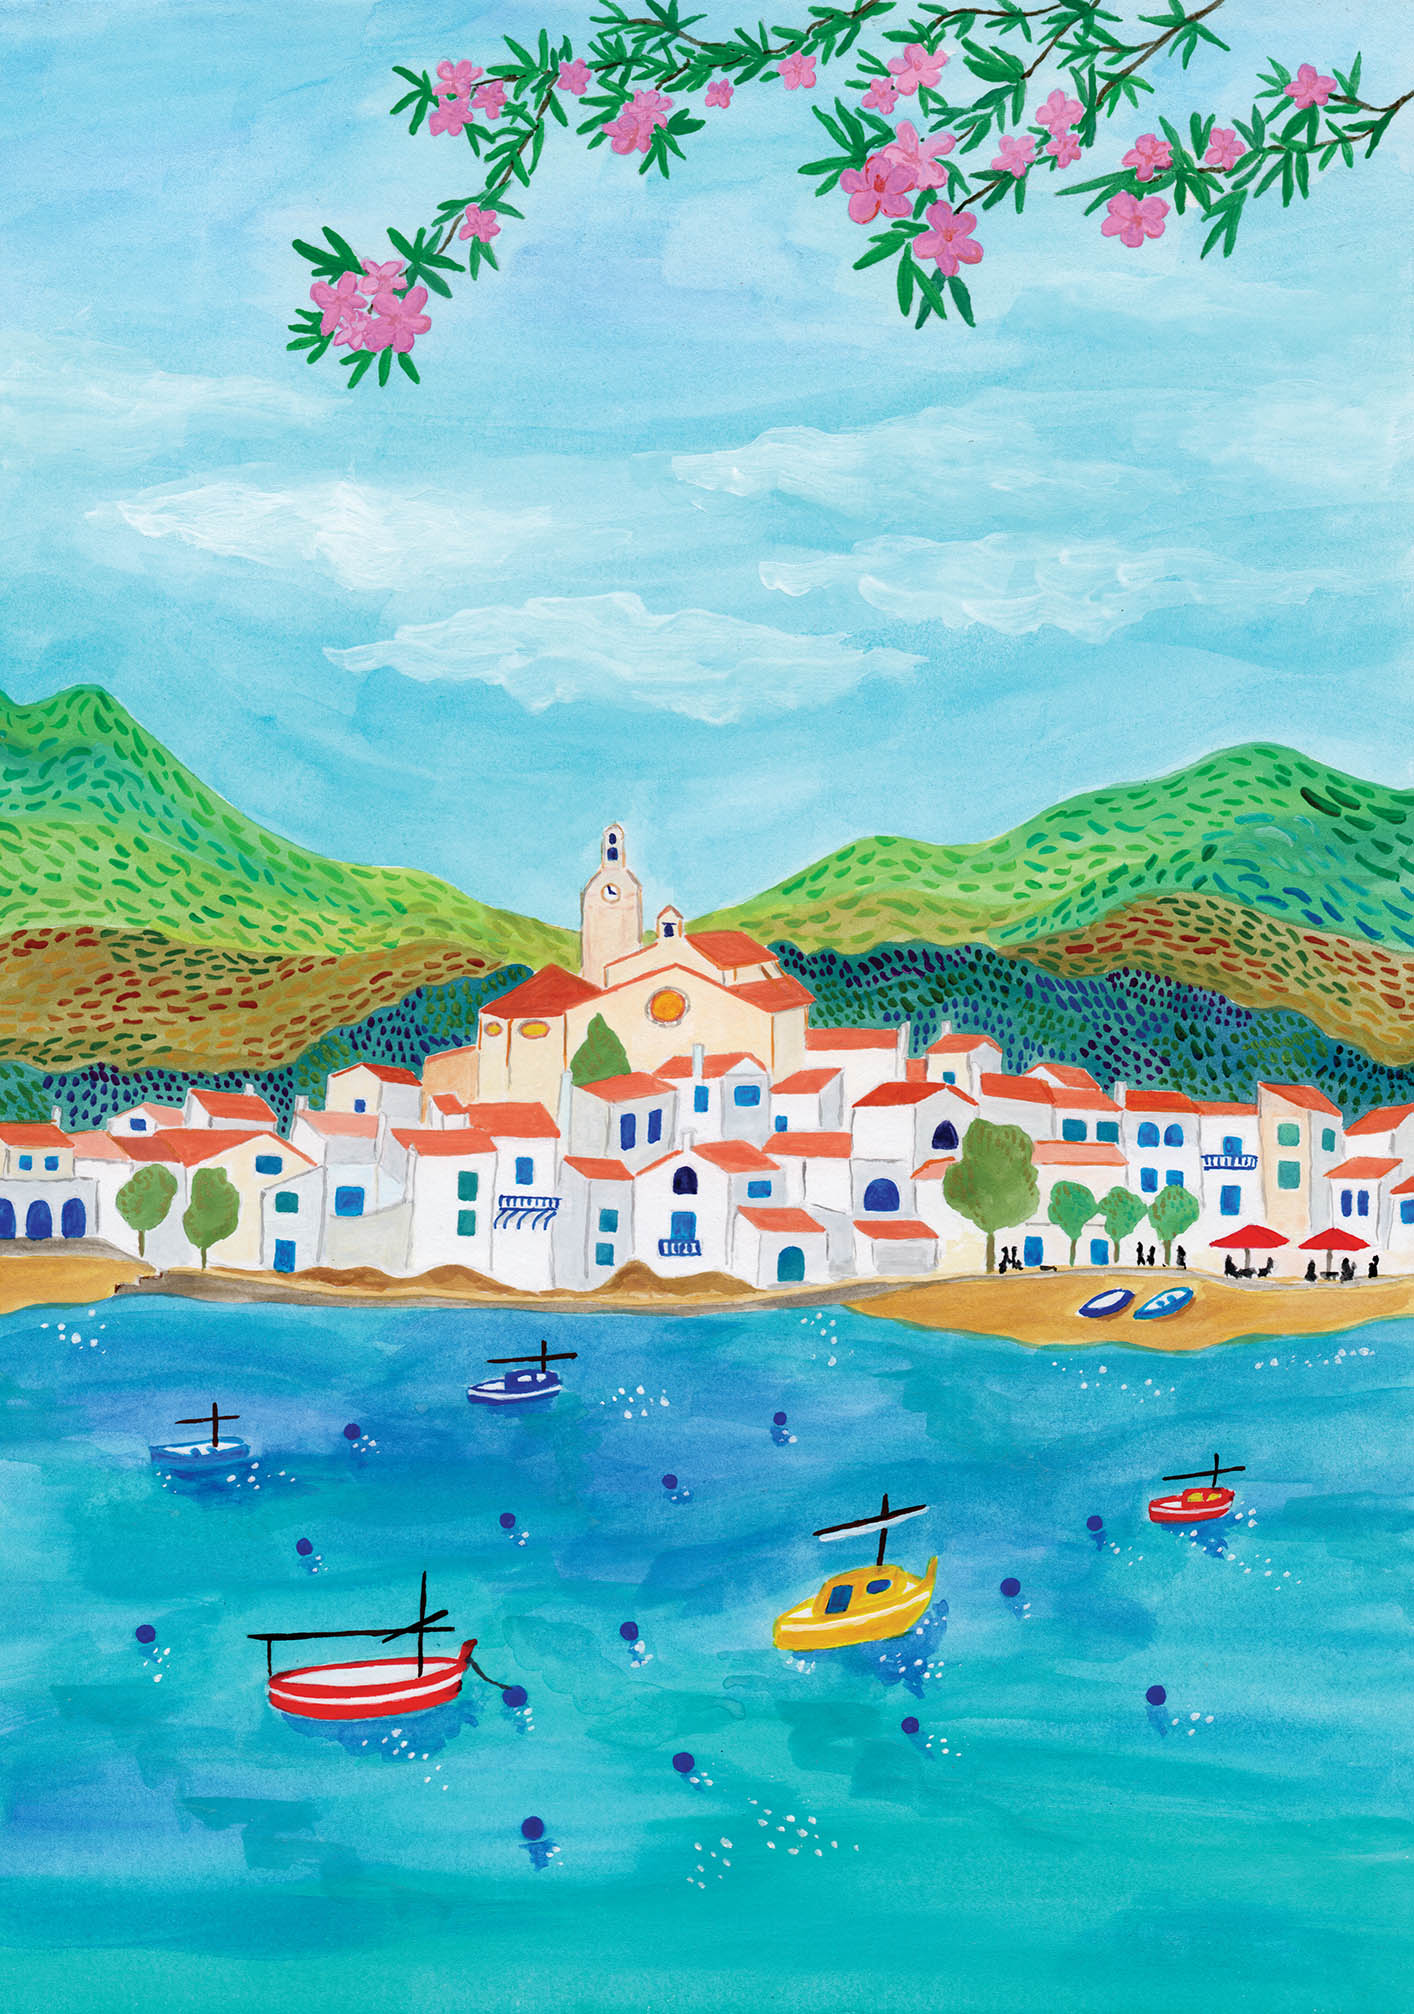 A gouache painting of the village of Cadaques in the Costa Brava, Catalonia, Spain